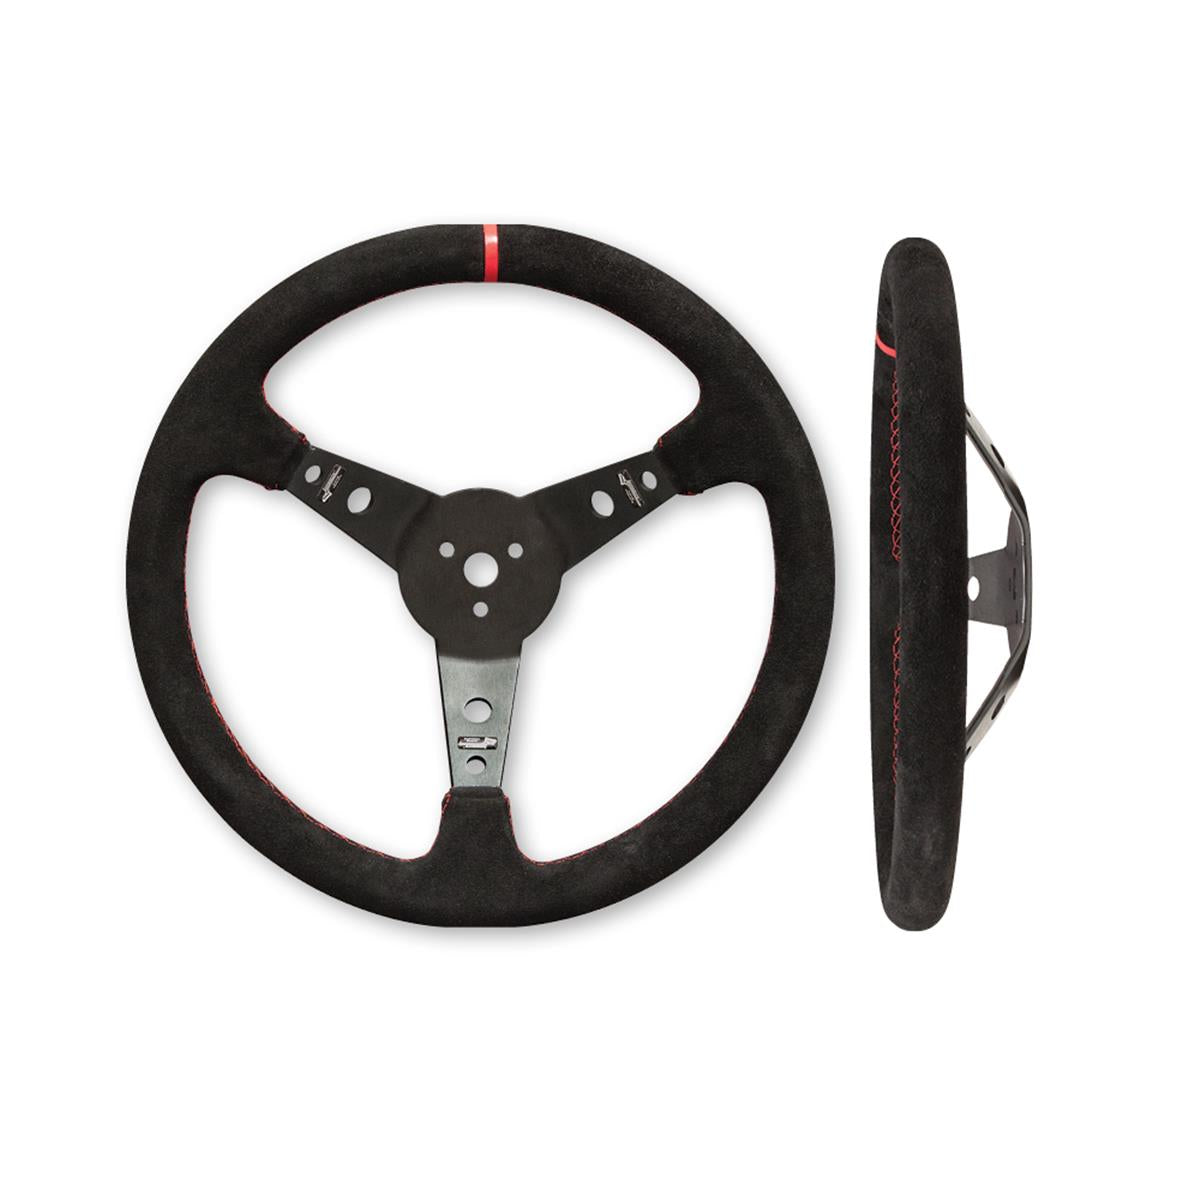 Longacre 15" Aluminum Dished Racing Wheel, Suede Wrapped - Black